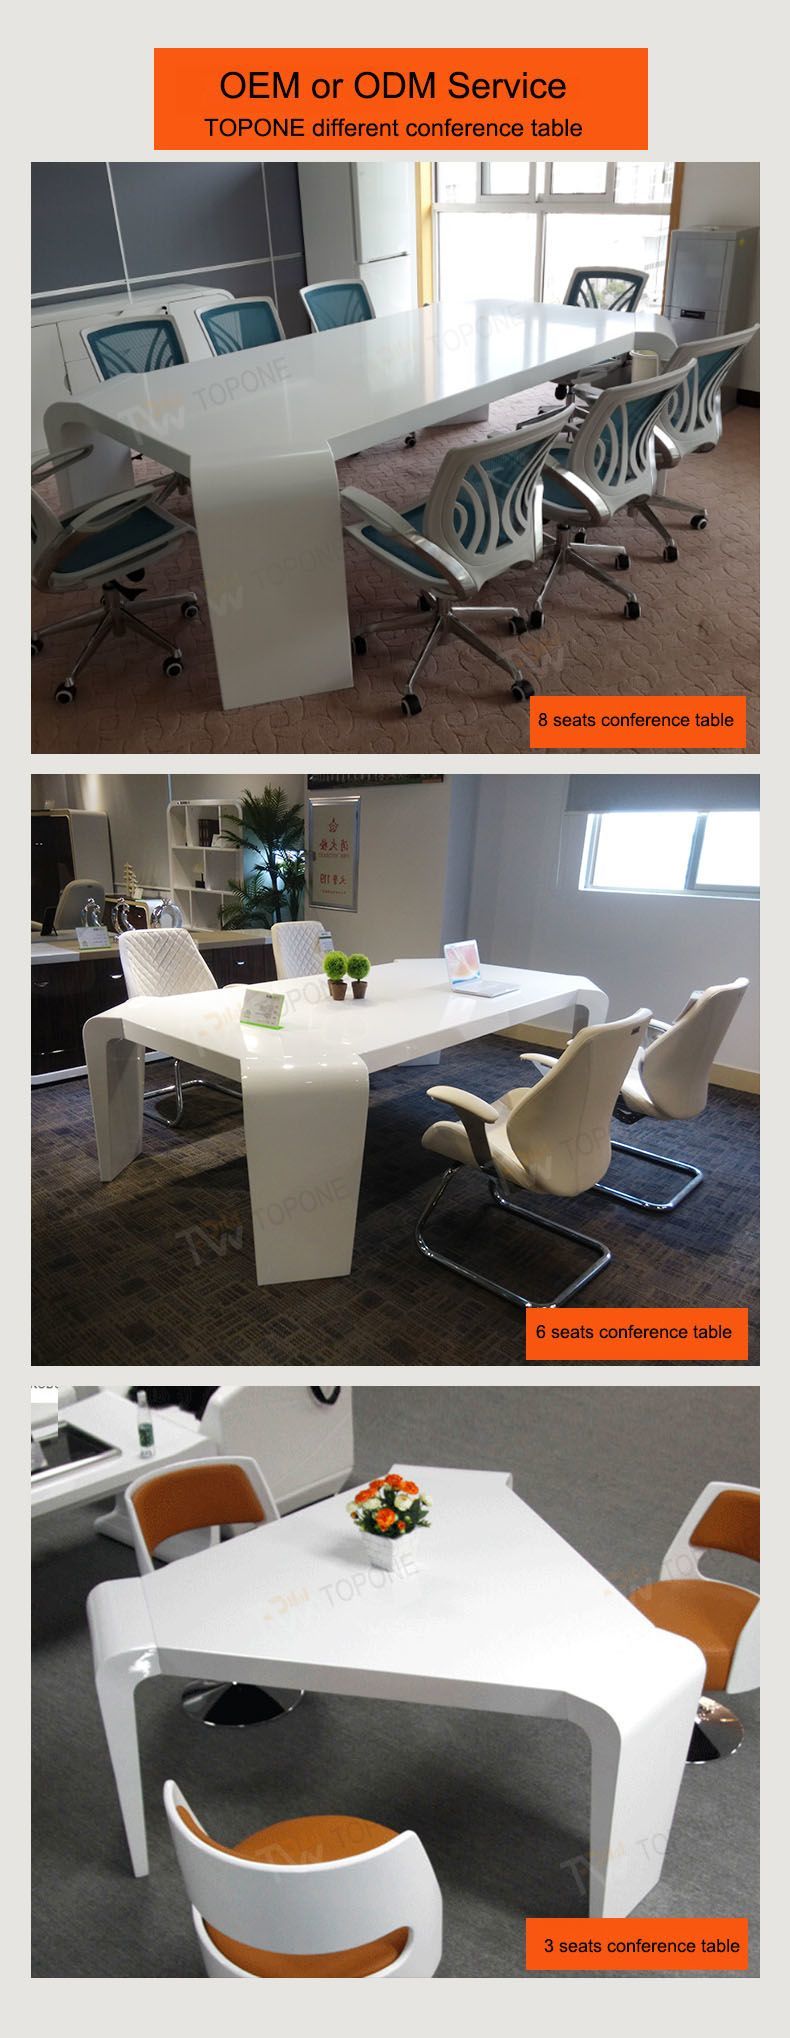 corian new design conference table.jpg